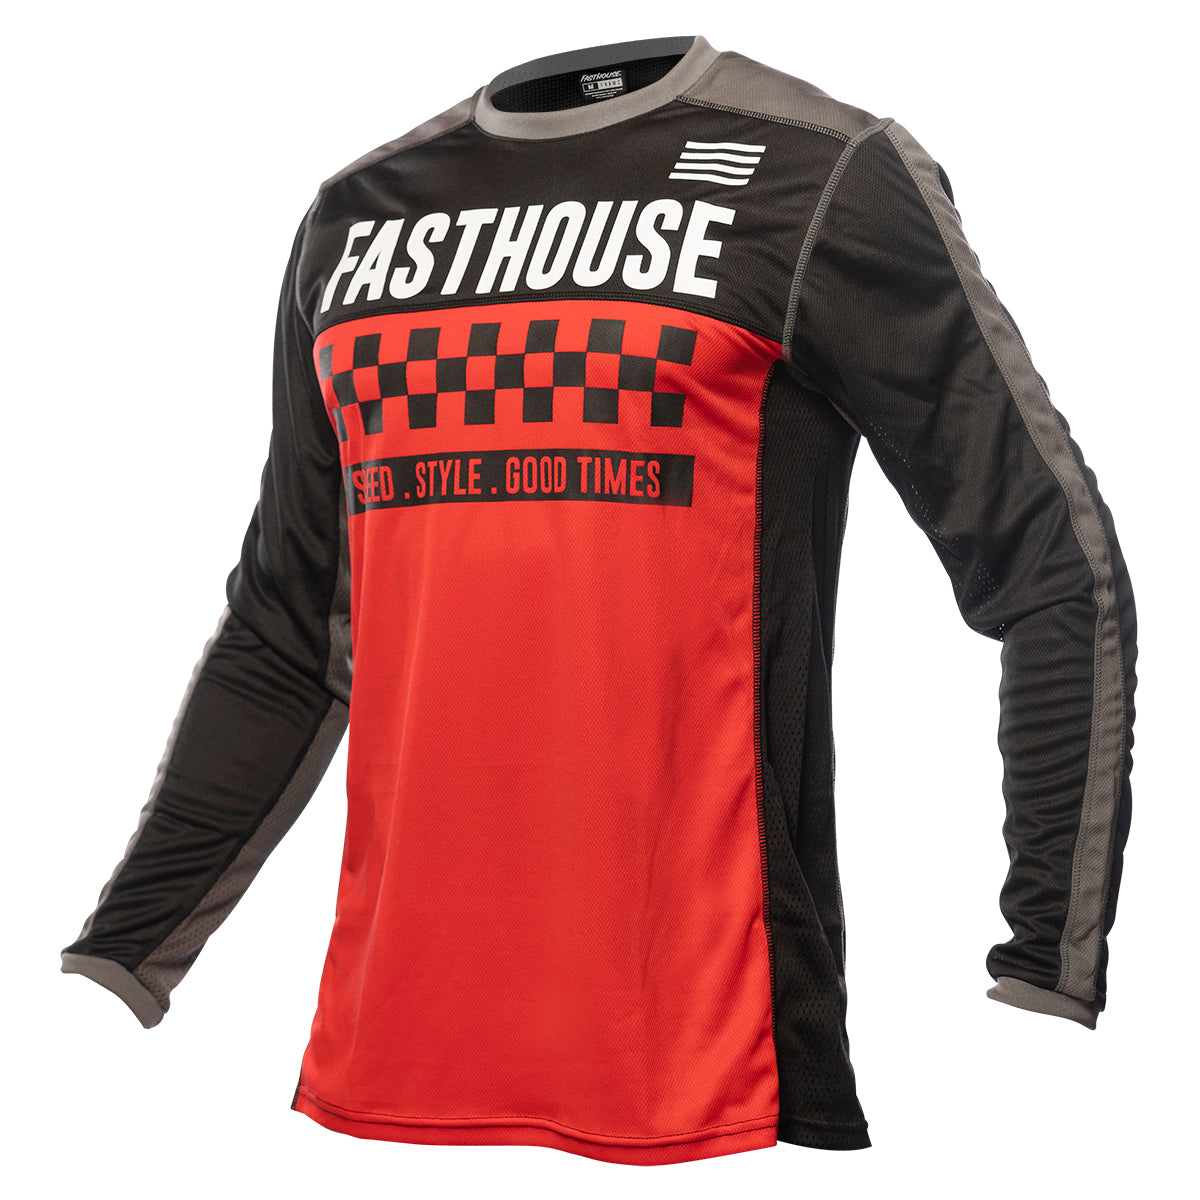 Grindhouse Torino Jersey - Red/Black